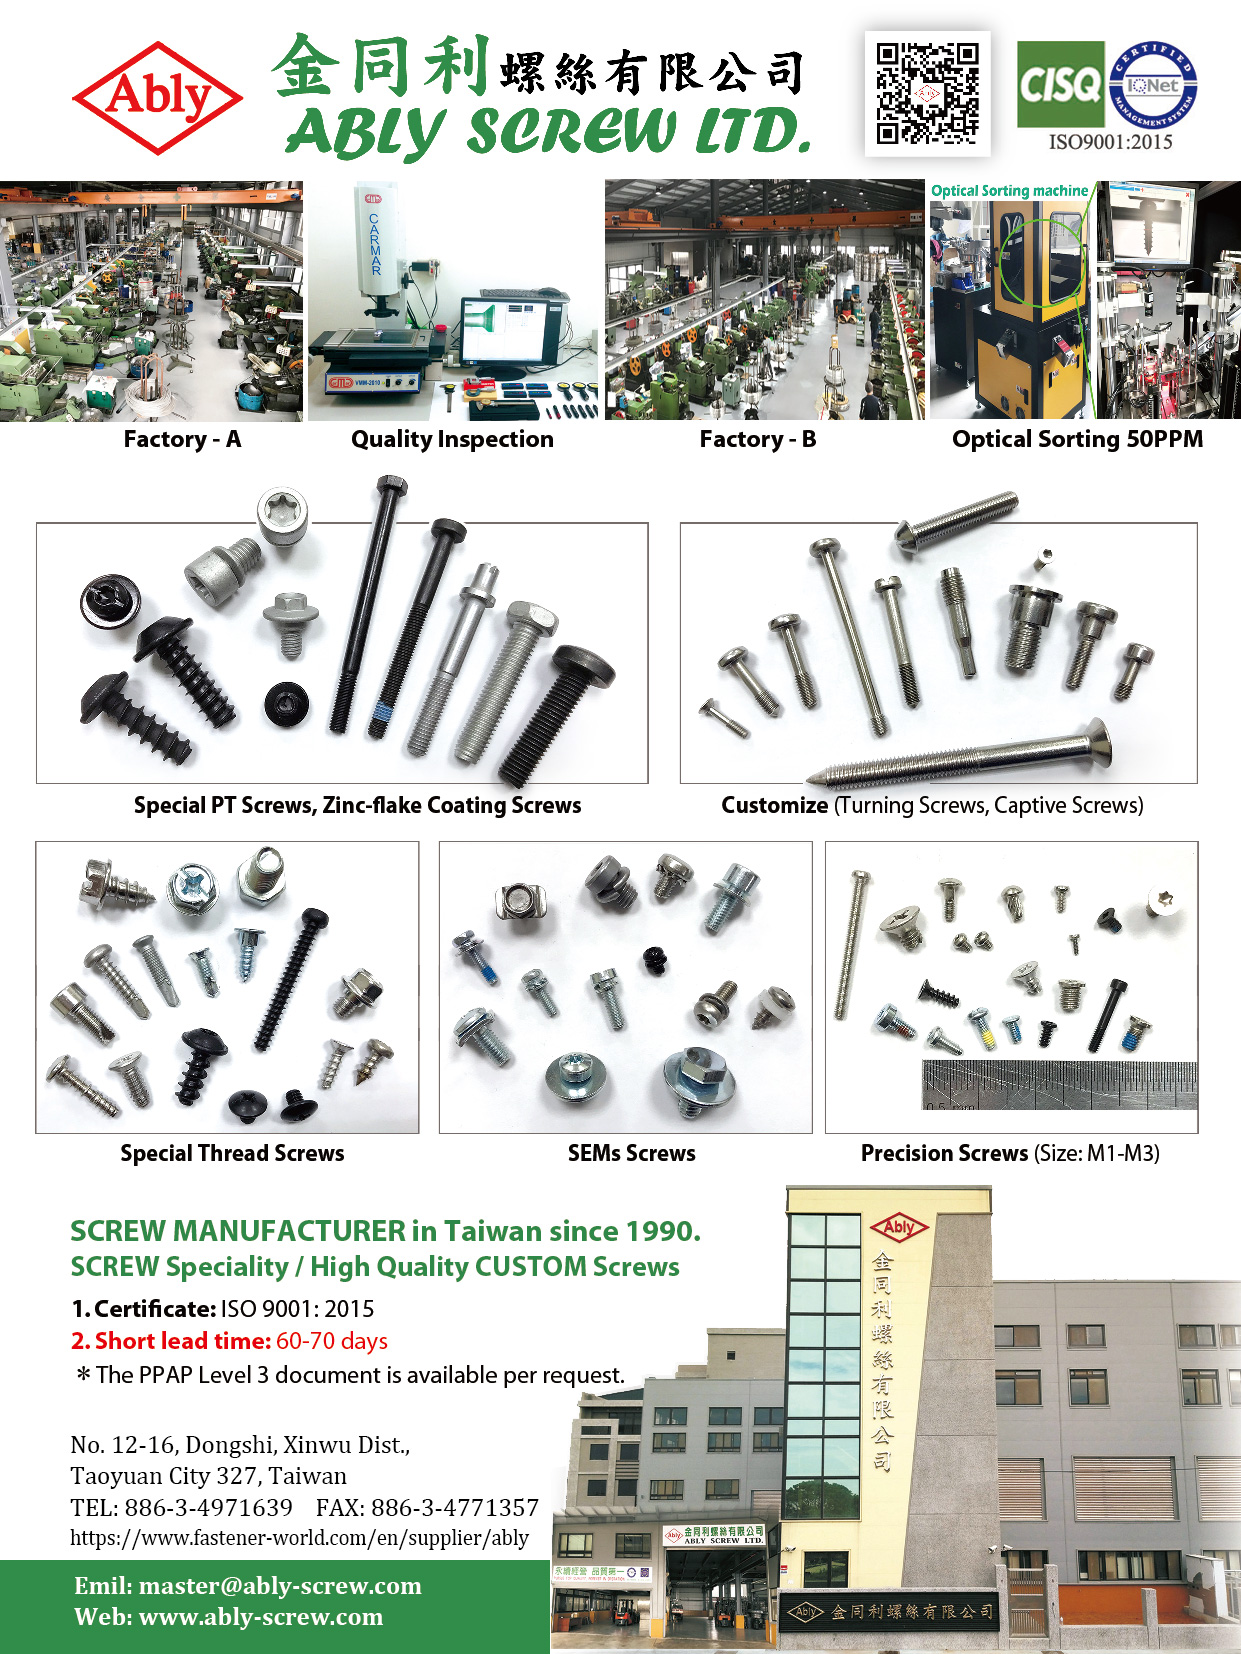 ABLY SCREW LTD. Online Catalogues